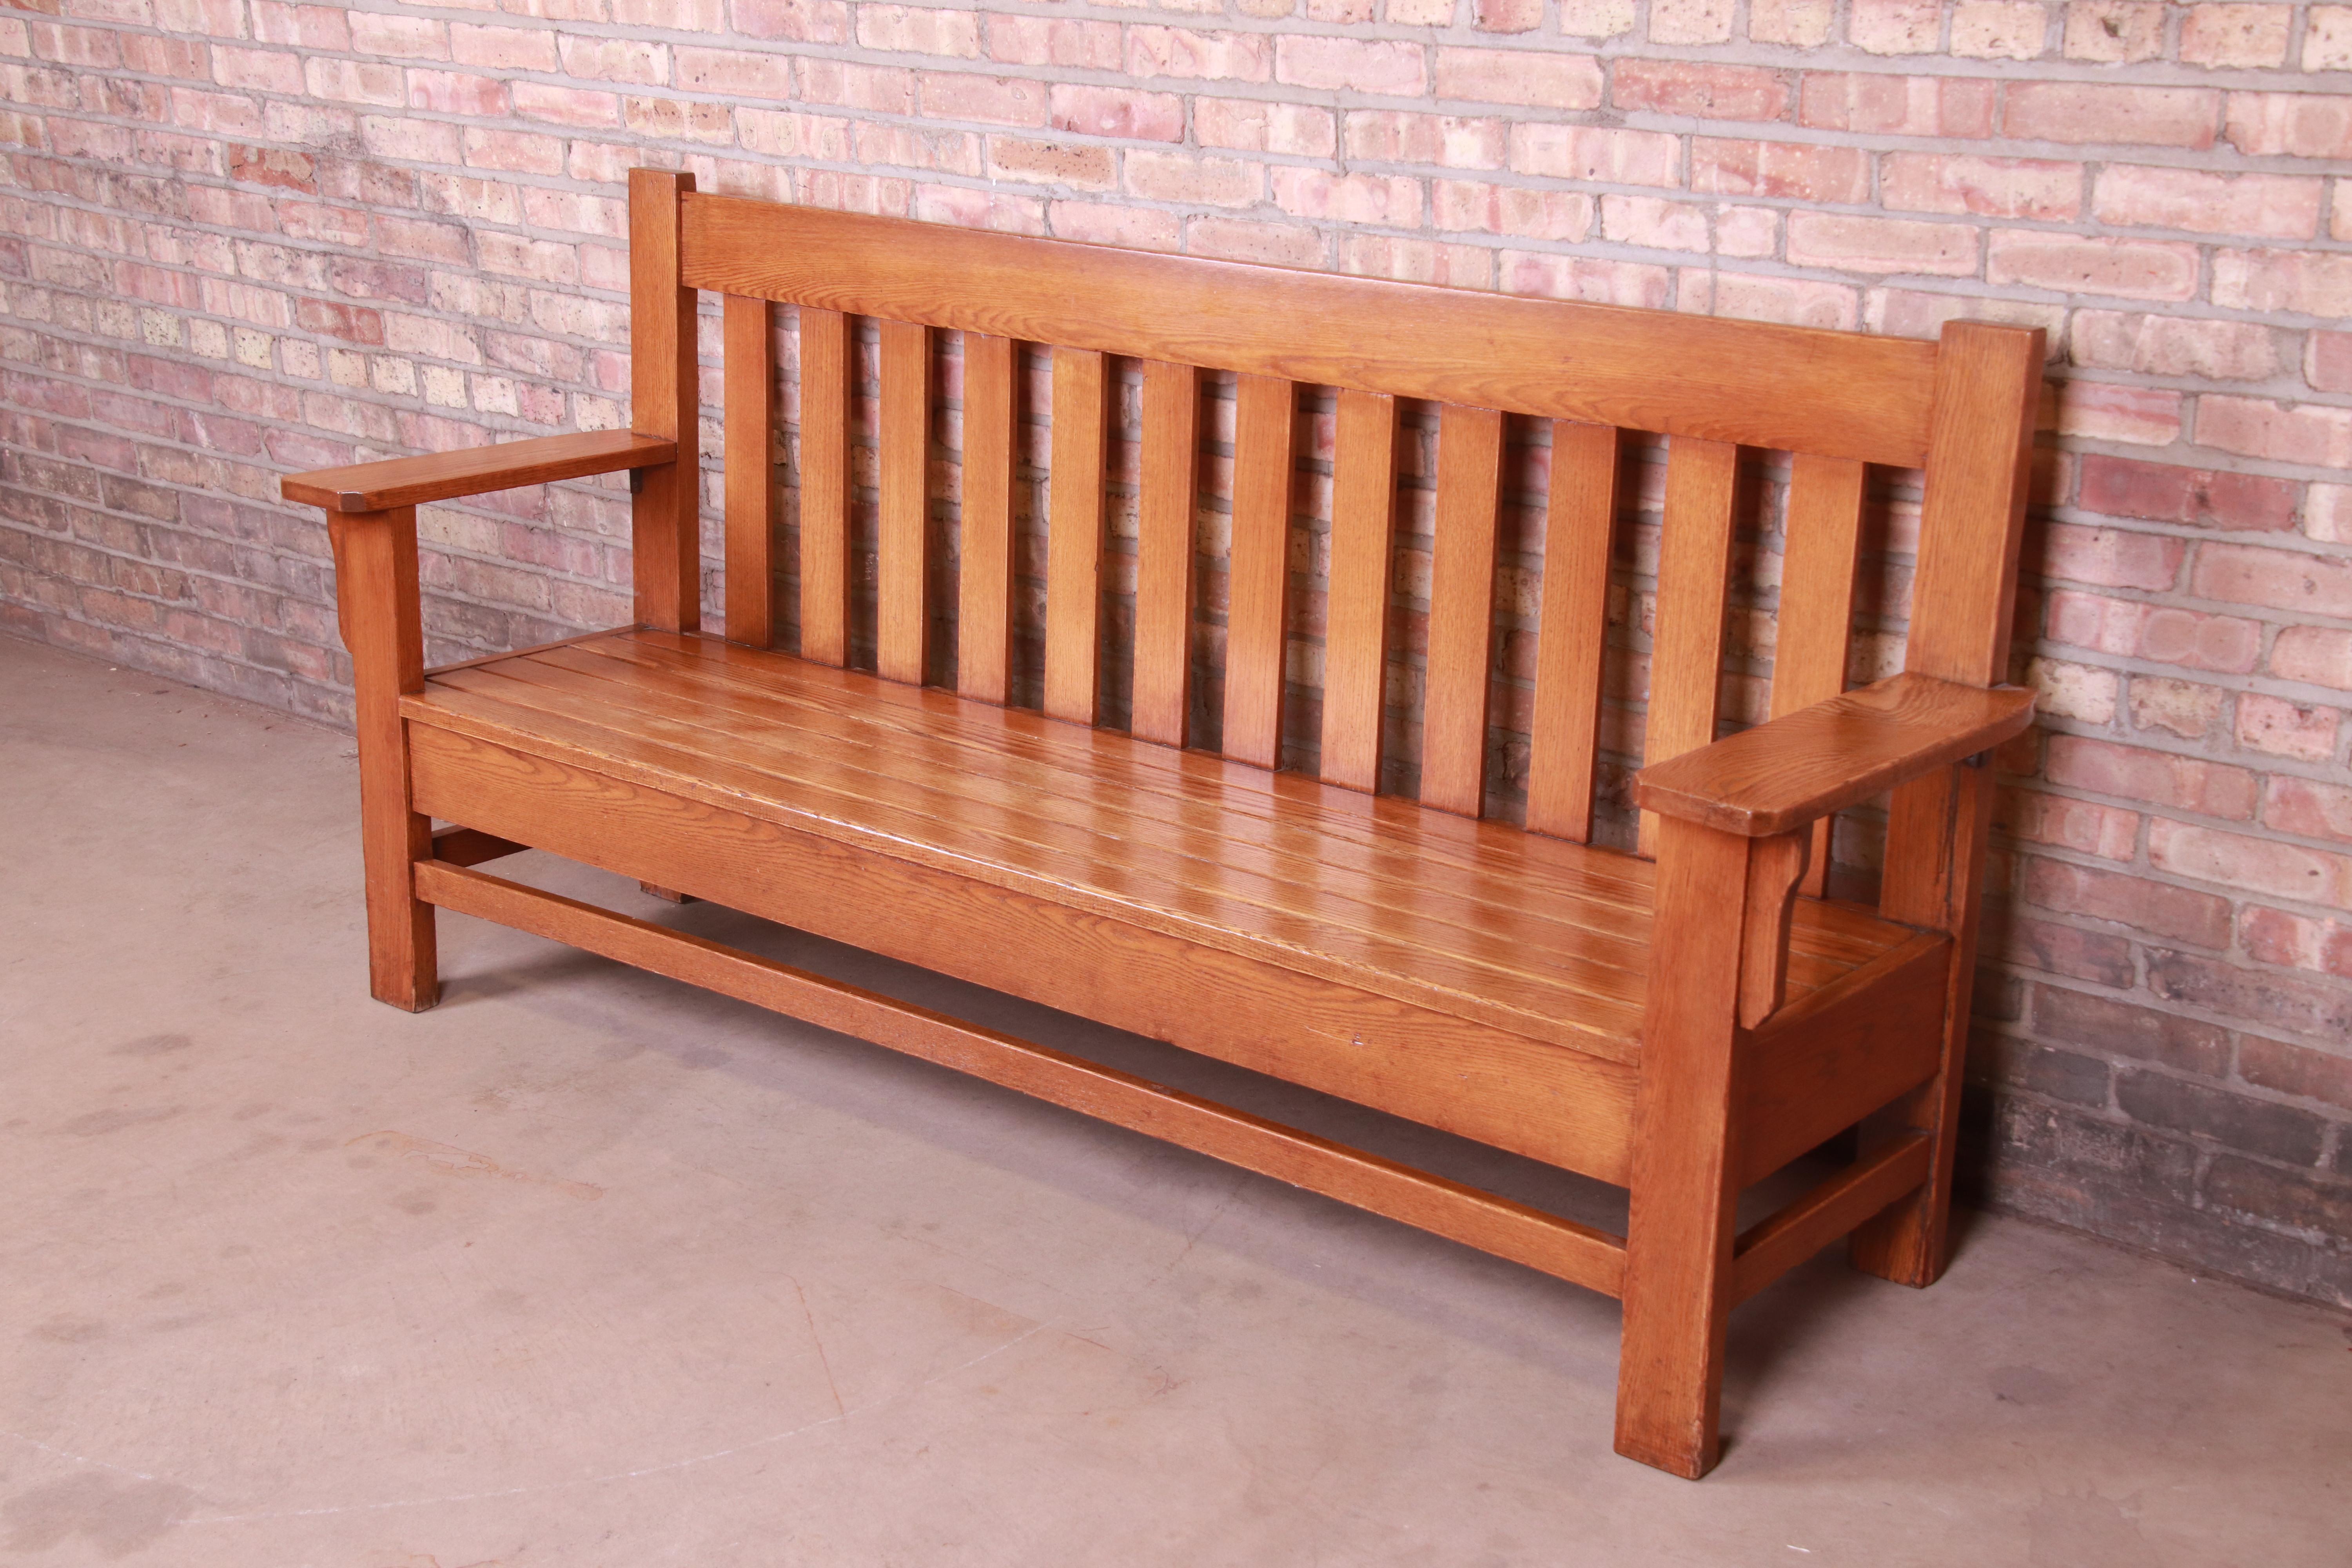 An exceptional Mission oak Arts & Crafts settle or bench

In the manner of Stickley

USA, early 20th century

Measures: 78.75